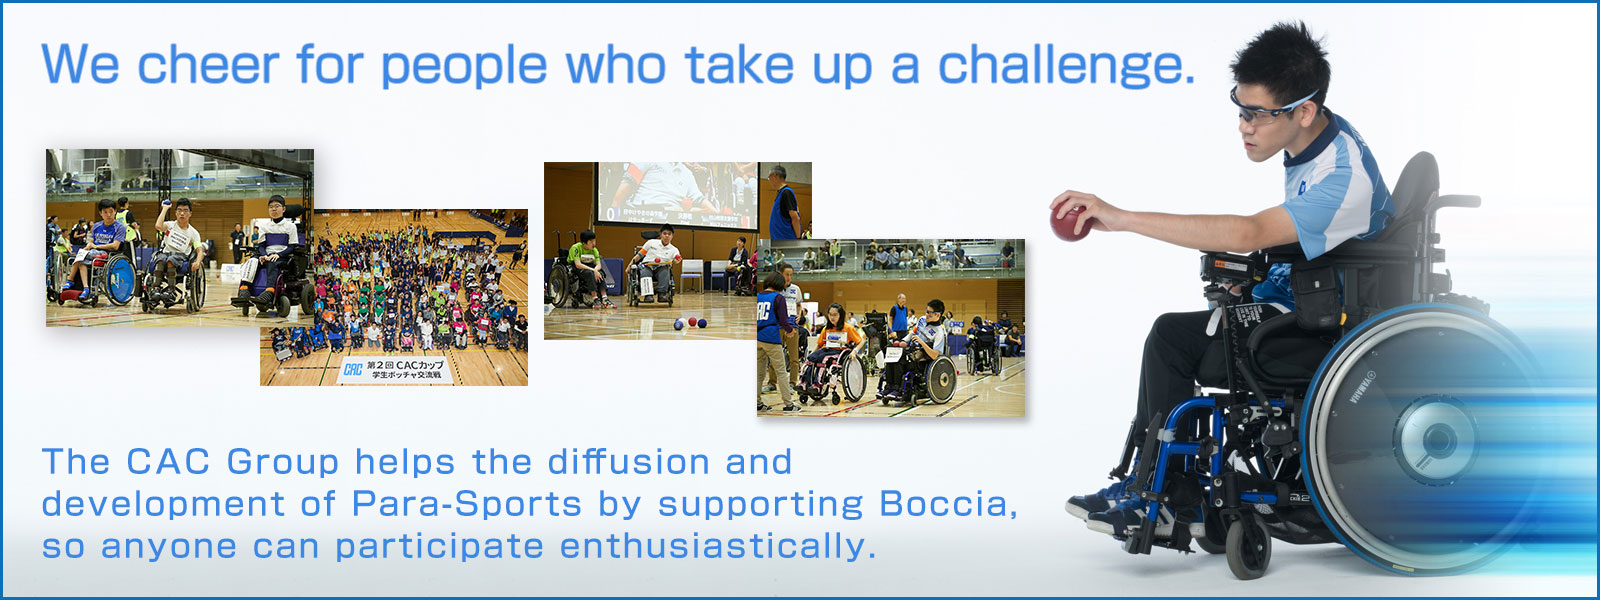 We cheer for people who take up a challenge.The CAC Group helps the diffusion and development of Para-Sports by supporting Boccia, so anyone can participate enthusiastically.